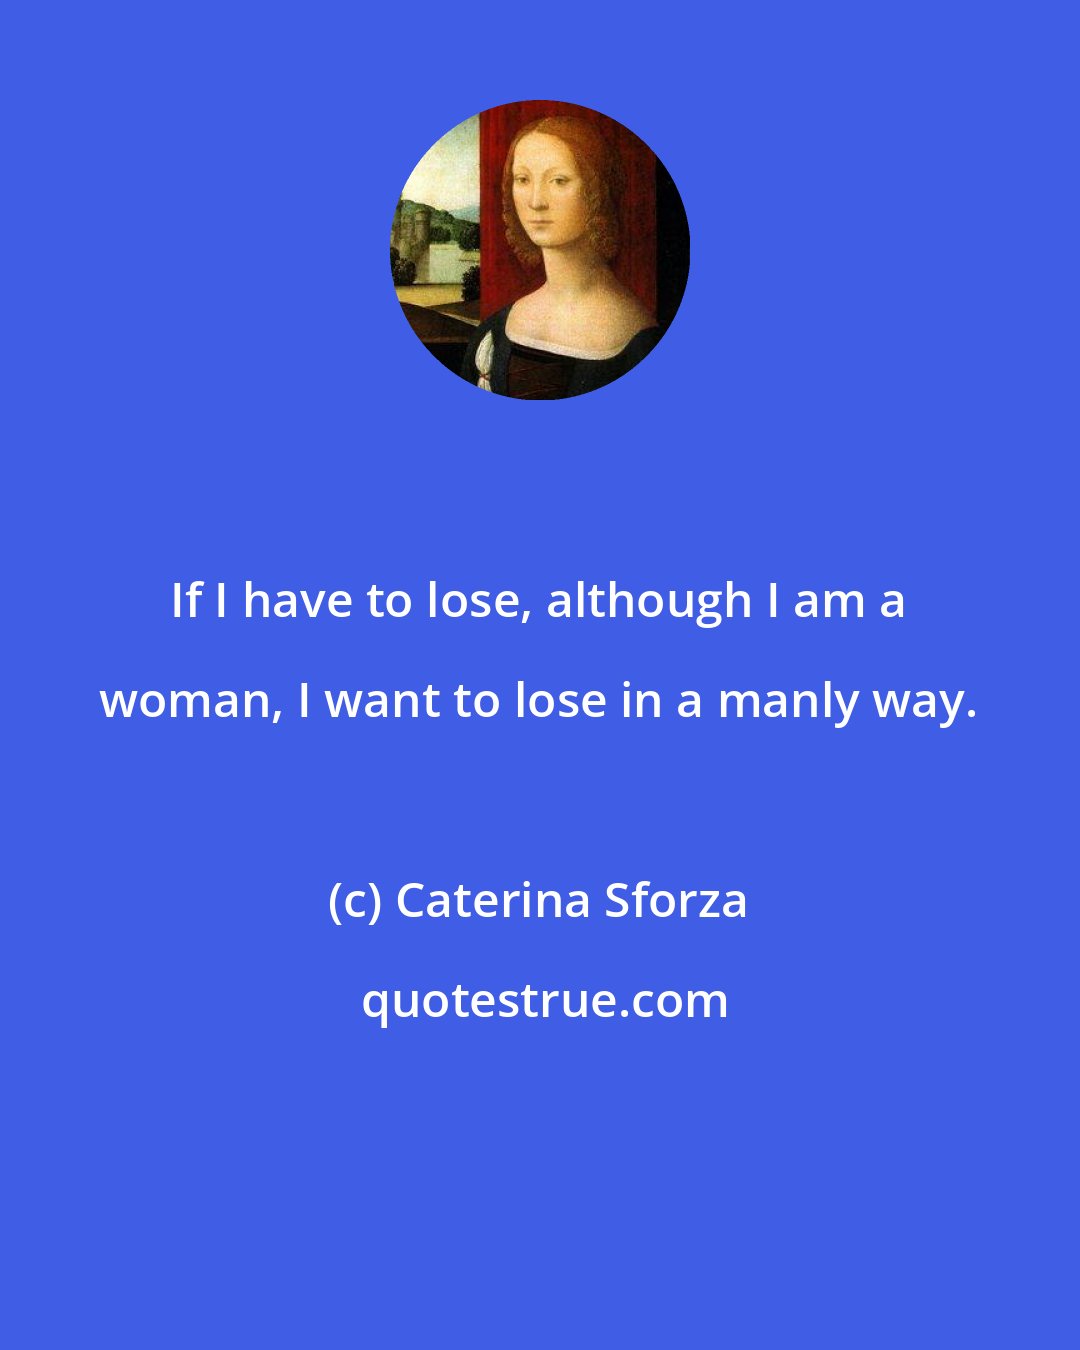 Caterina Sforza: If I have to lose, although I am a woman, I want to lose in a manly way.